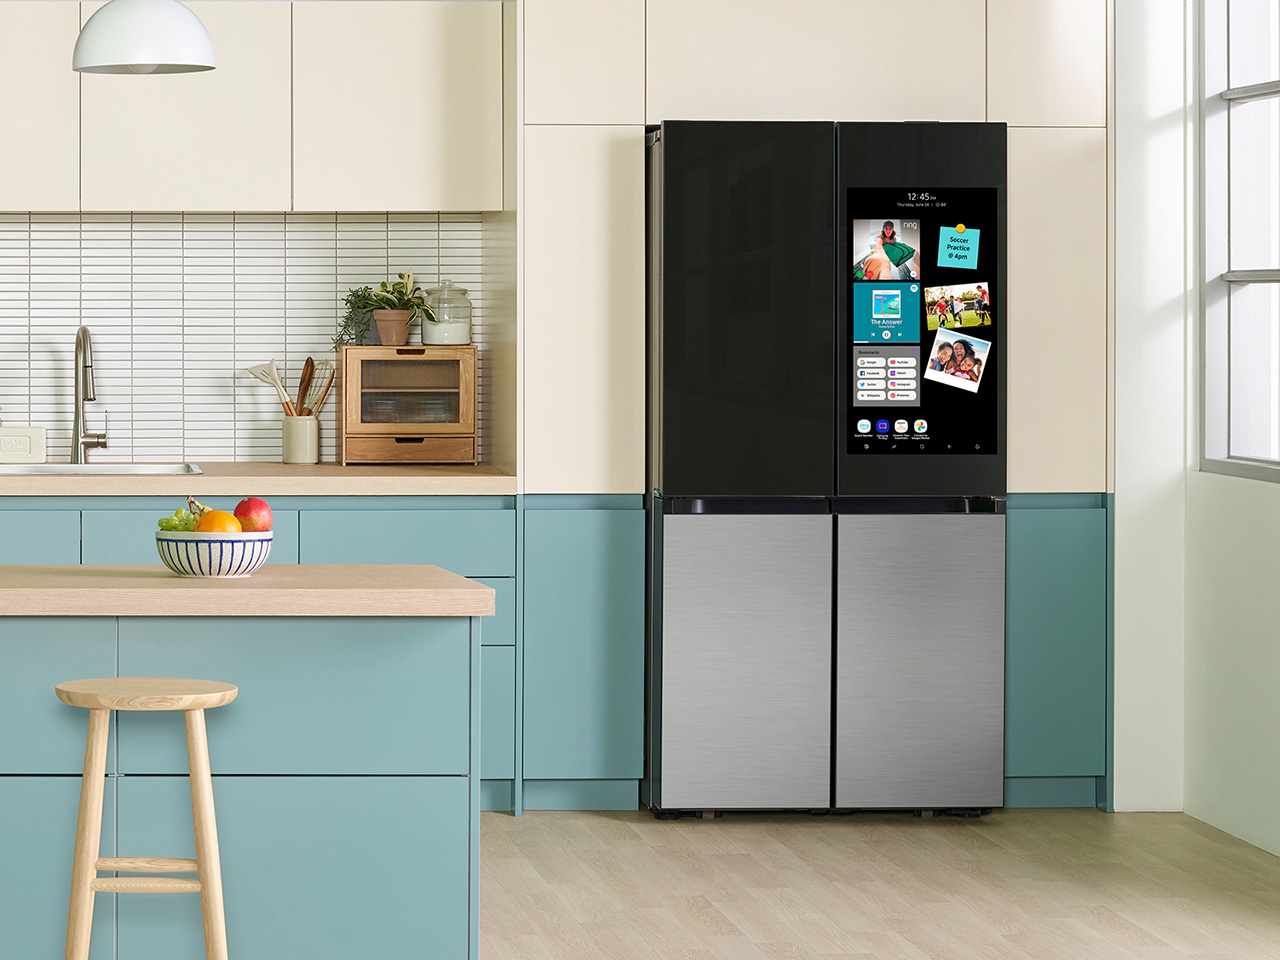 Samsung New Bespoke Family Hub Refrigerator Doubles Down on Screen Size